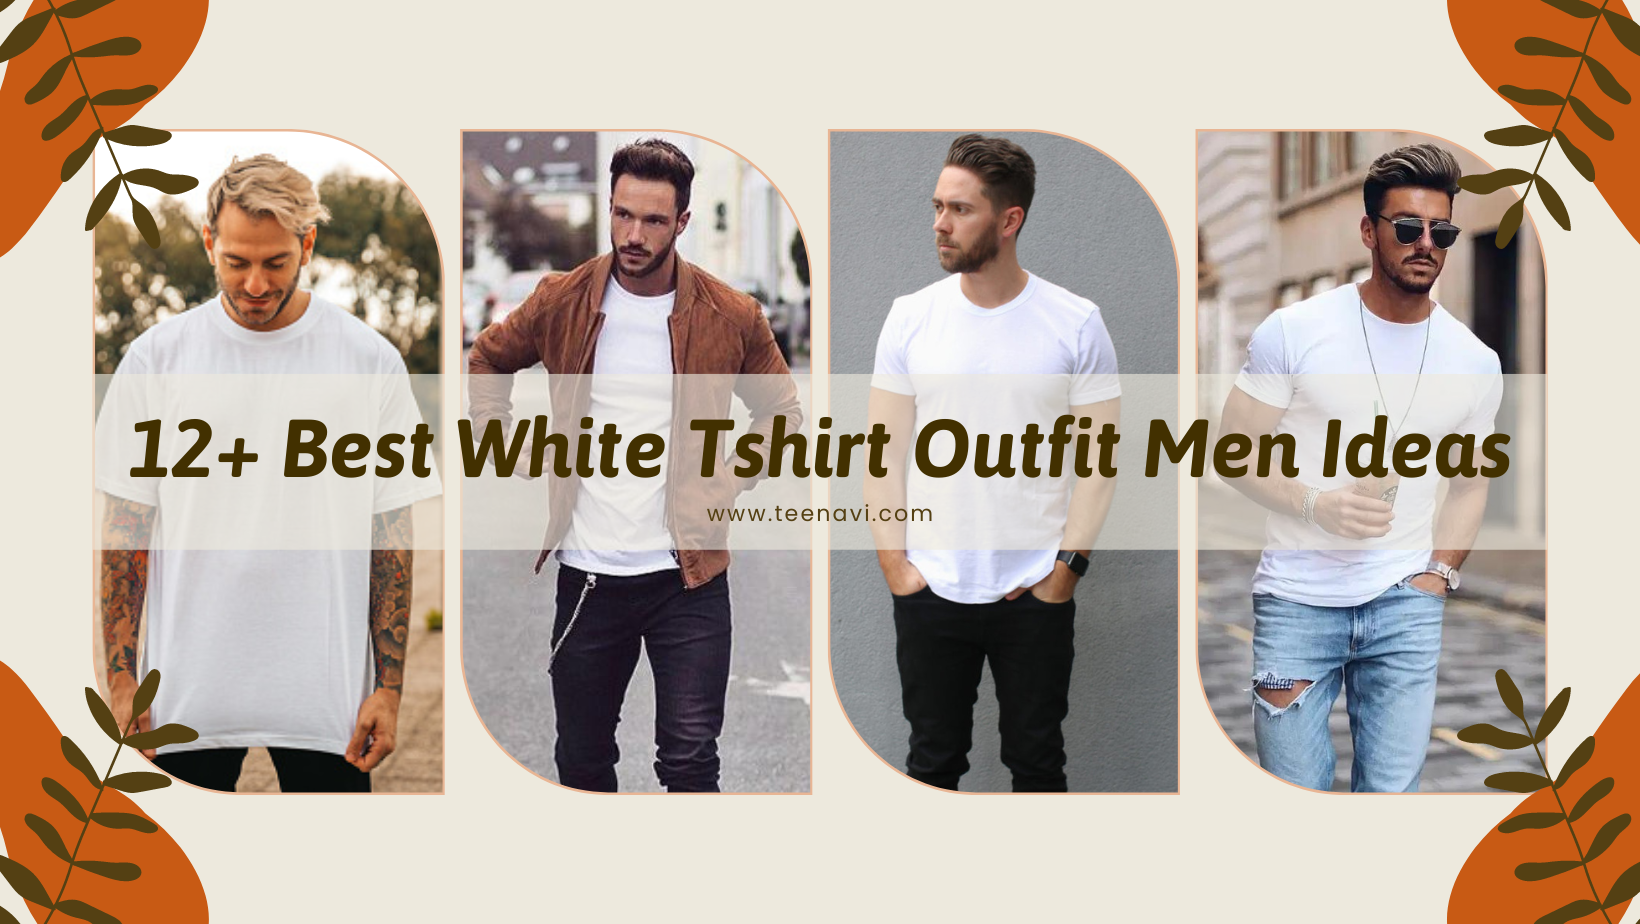 8 Types of Shirt Every Man Should Have In Their Wardrobe